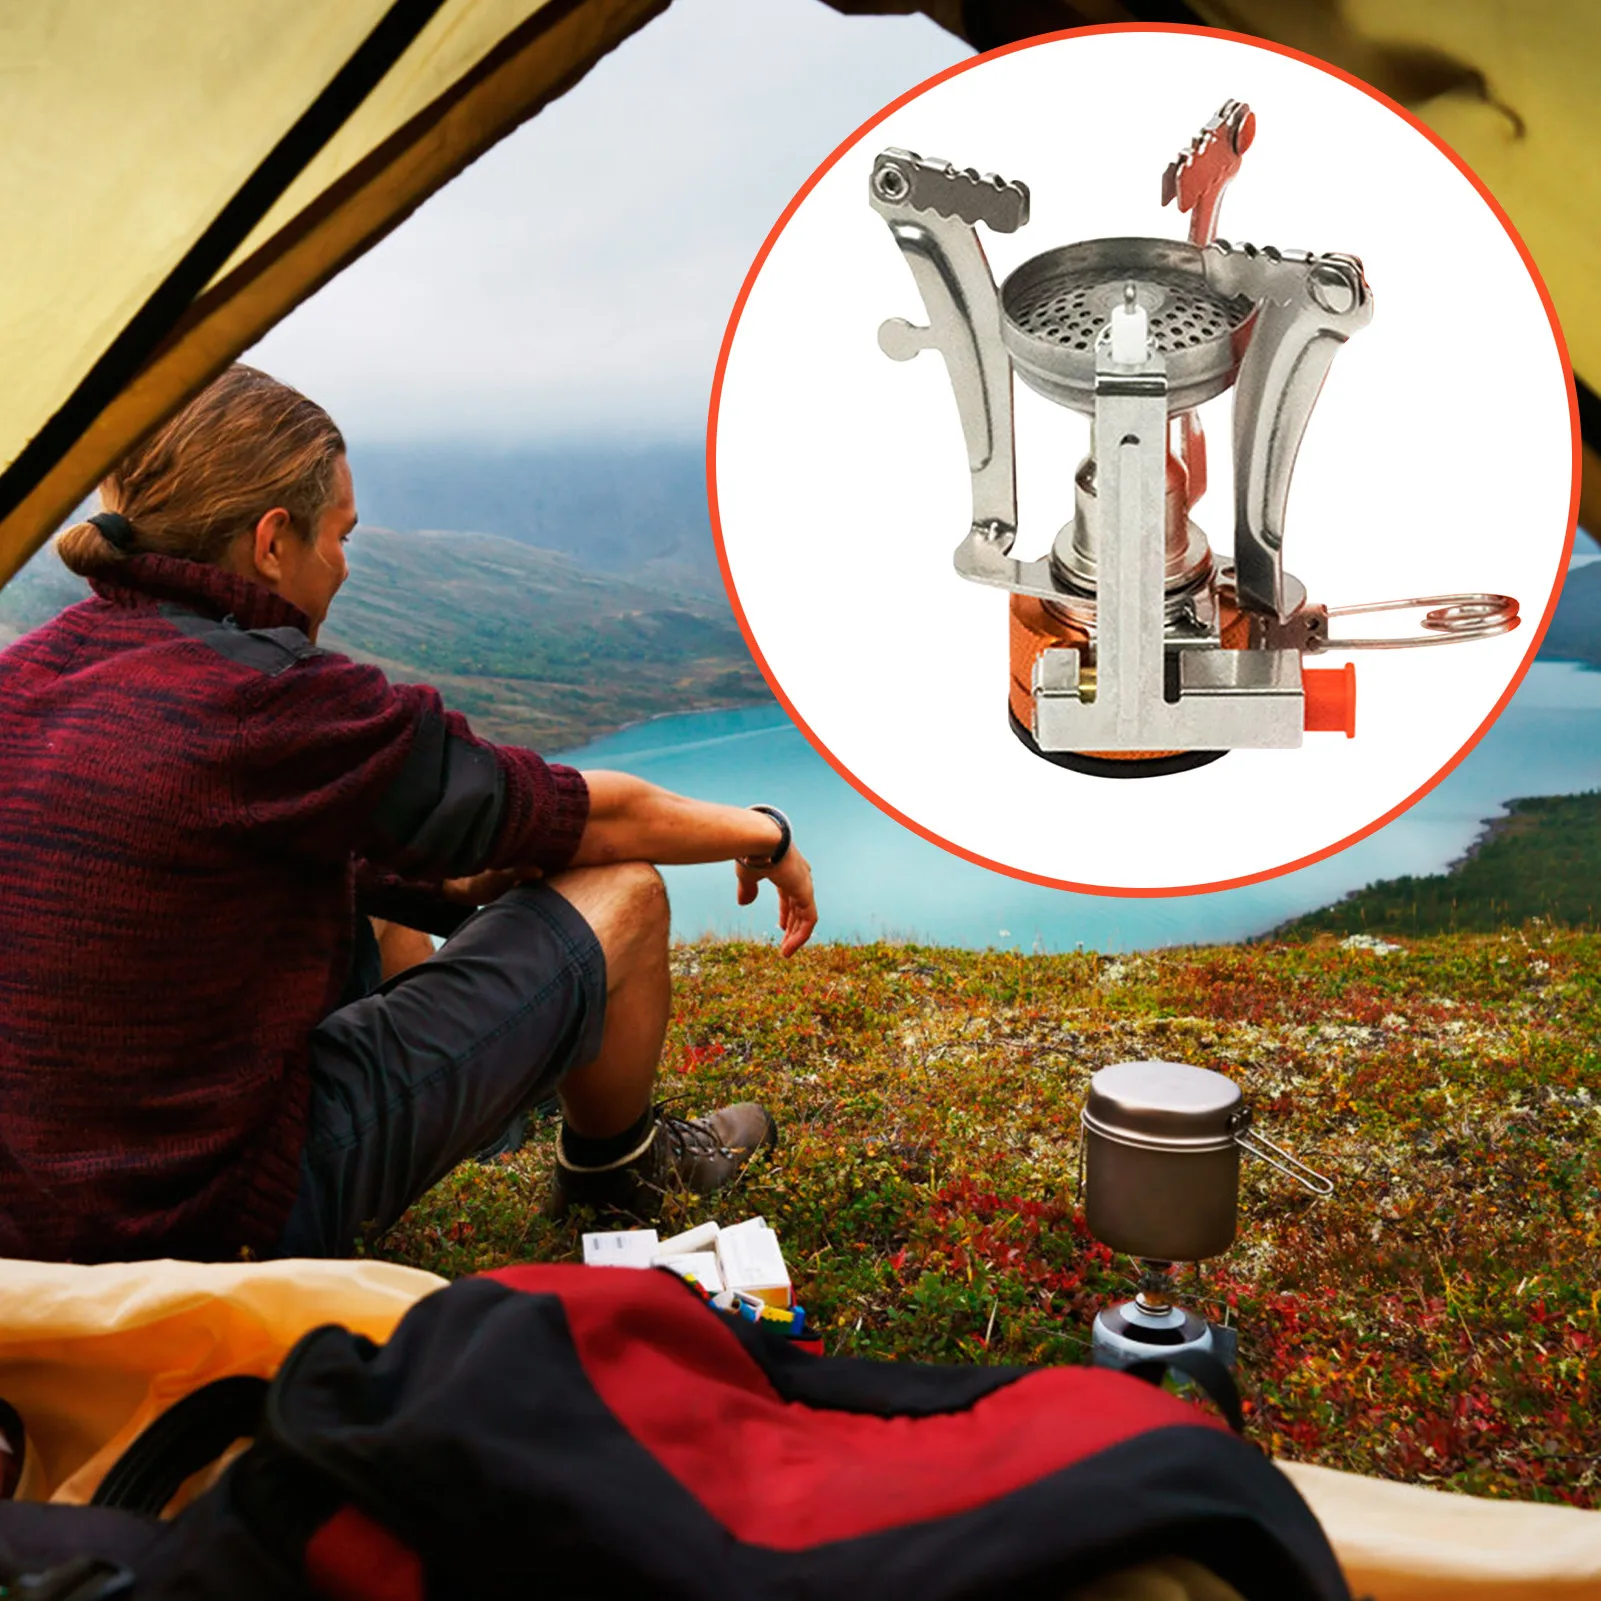 Pocket Rocket Stove 3000W Portable Mini Pocket Rocket Camping Backpack Canister Stove Outdoor Cooking Burner Portable Small Camp